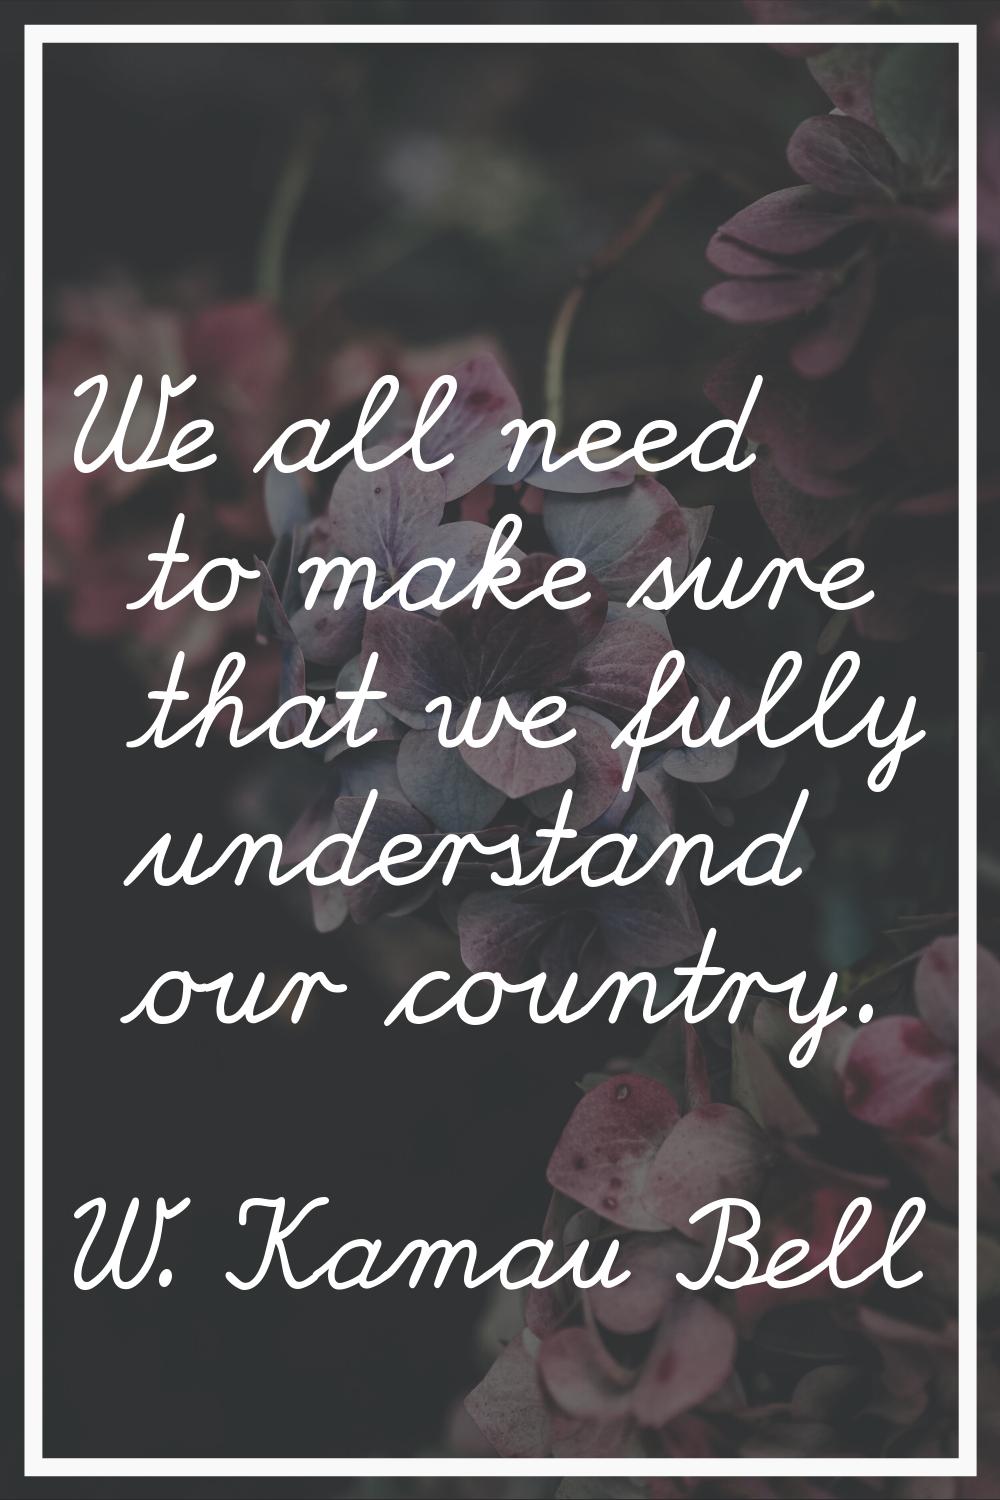 We all need to make sure that we fully understand our country.